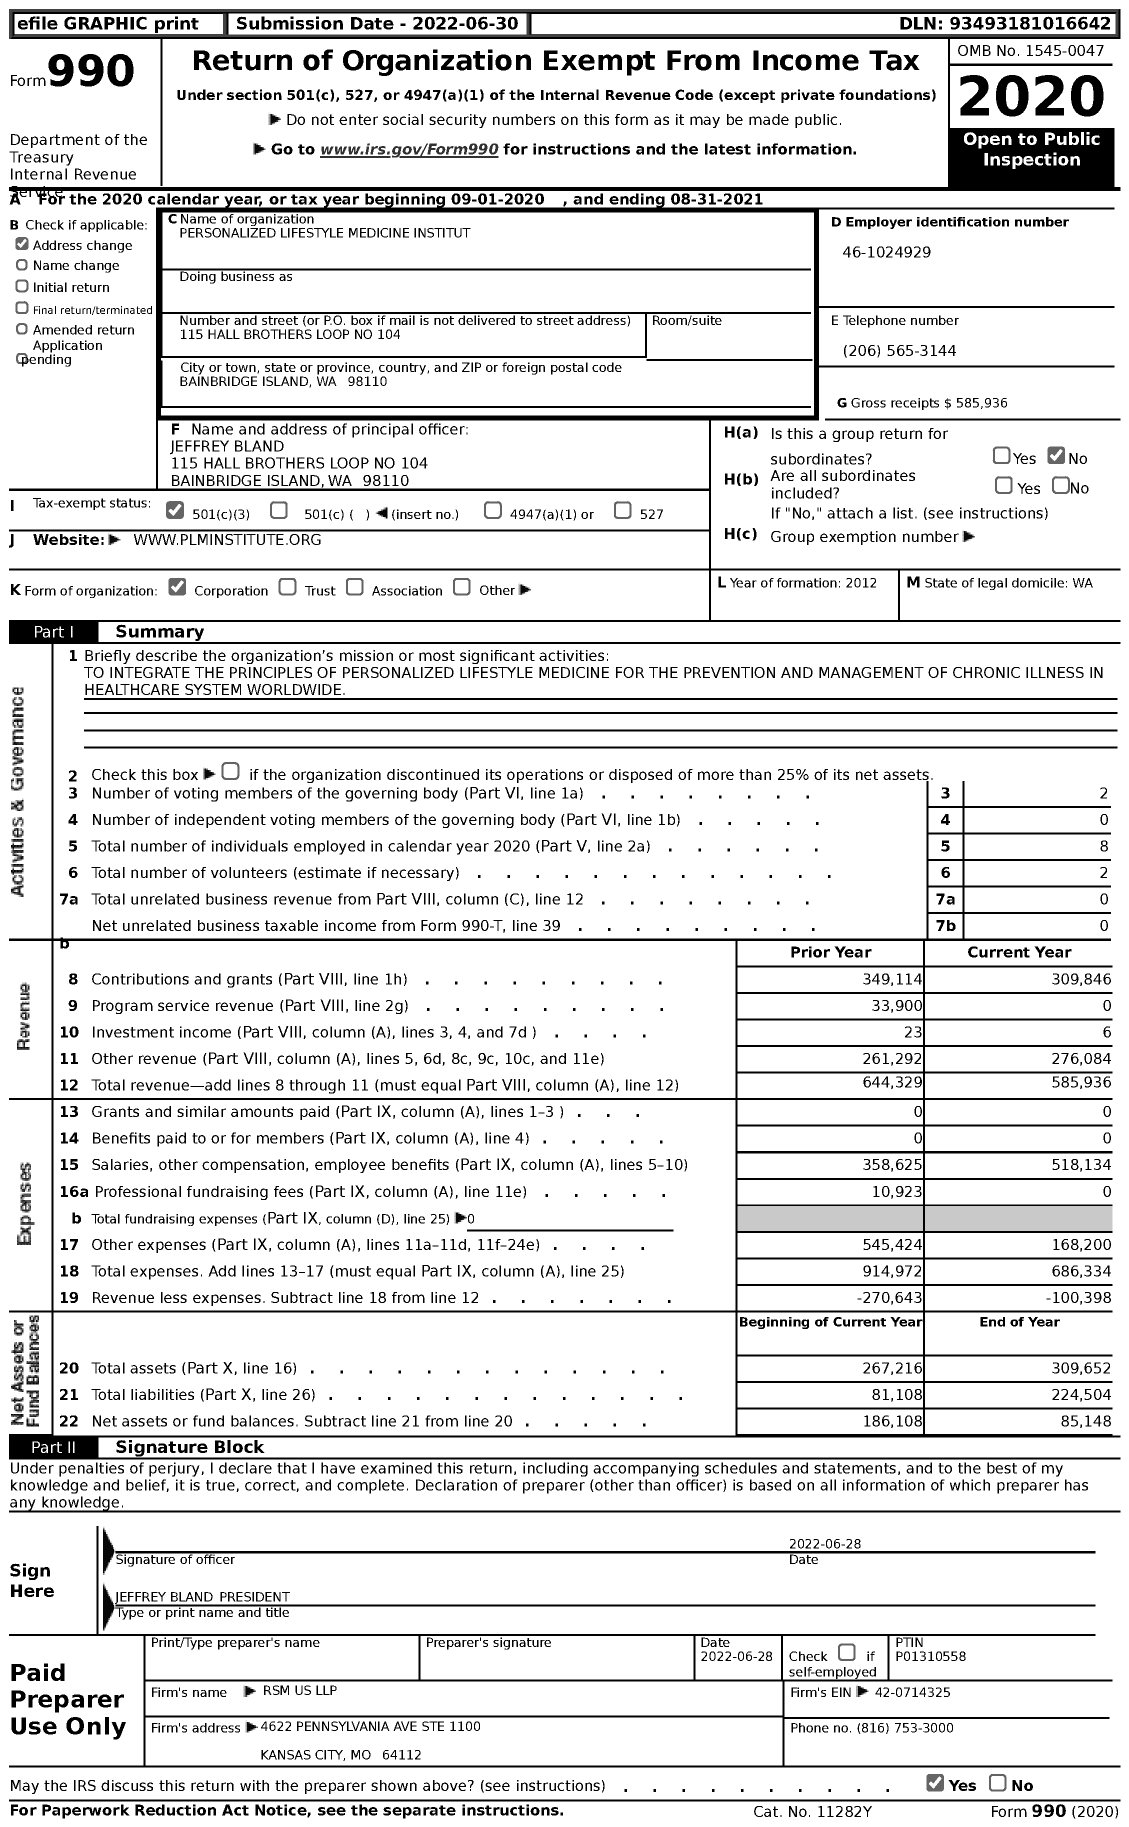 Image of first page of 2020 Form 990 for Personalized Lifestyle Medicine Institute